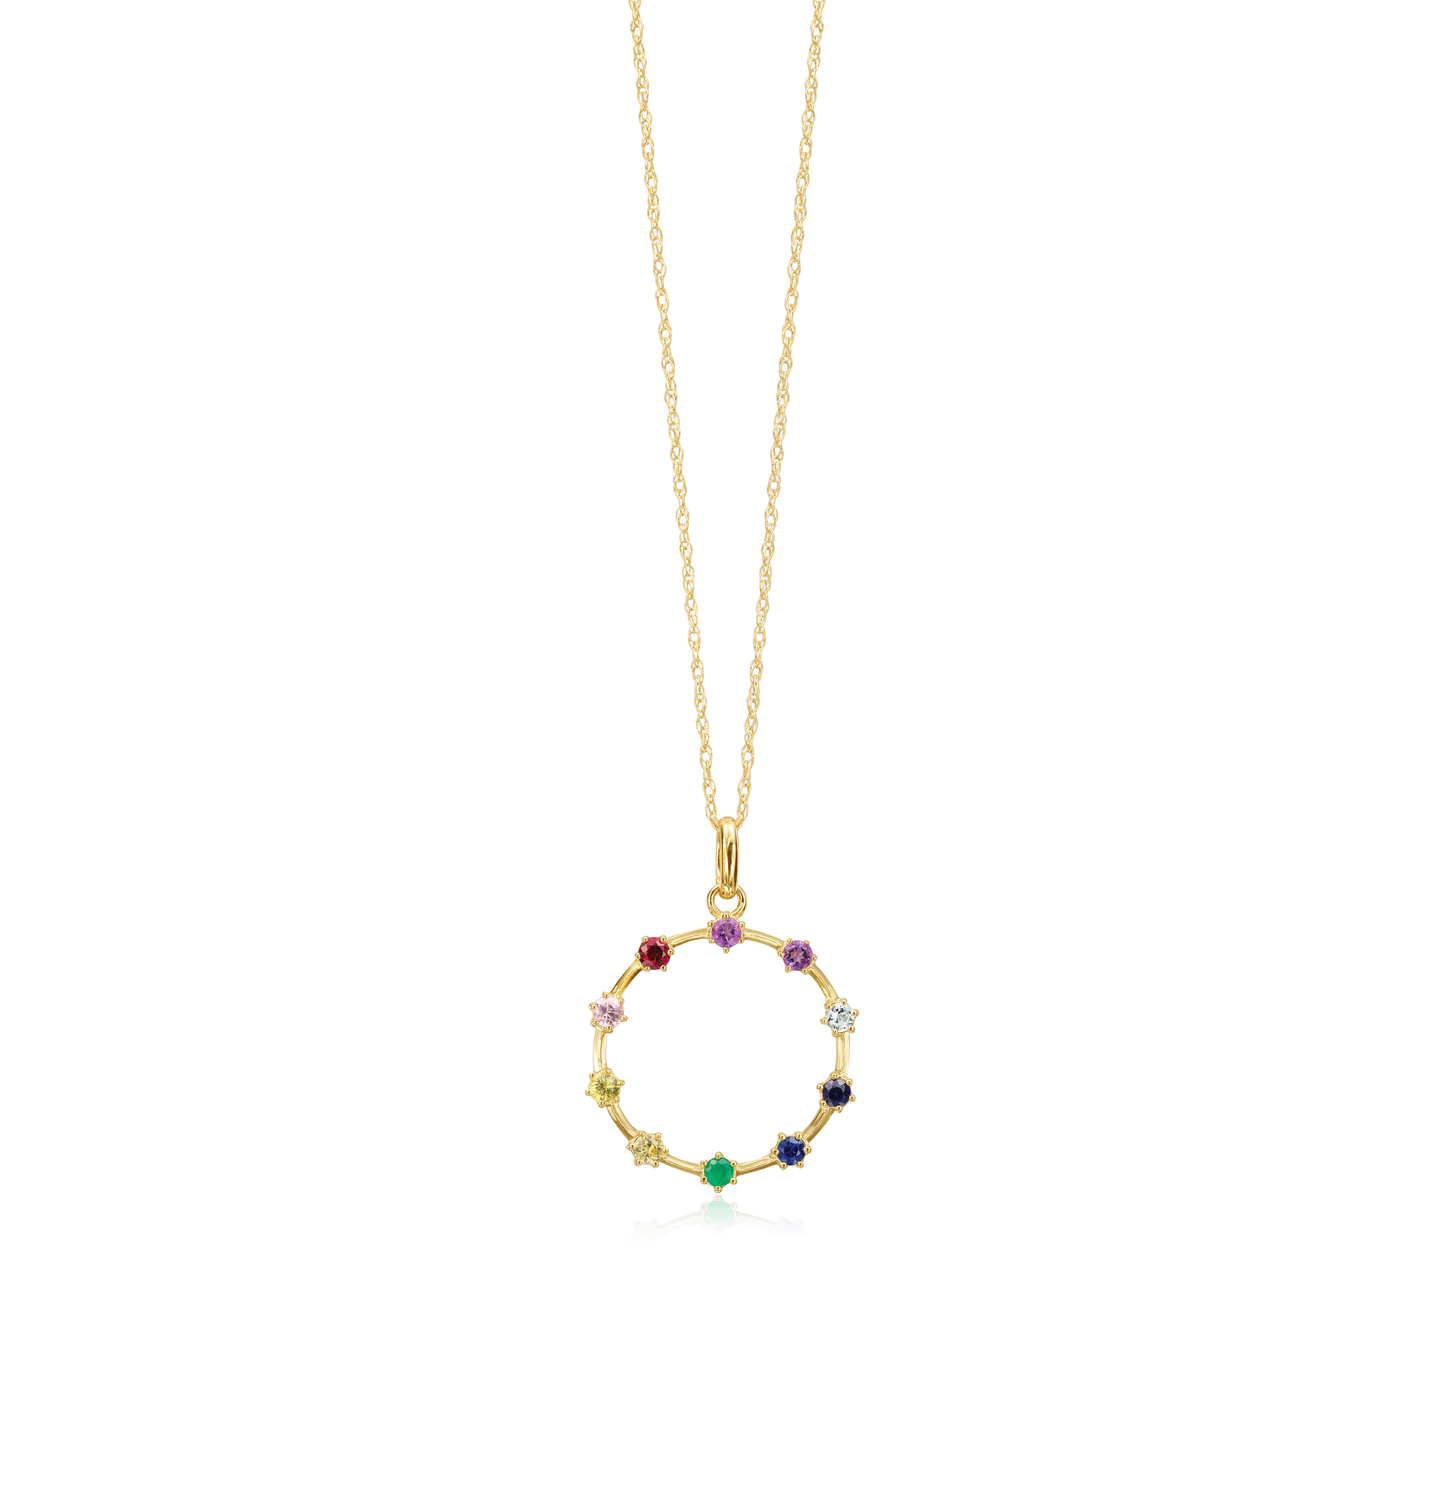 Sabel Collection 14K Yellow Gold Round Rainbow Sapphire, Ruby, and Emerald Circle Necklace